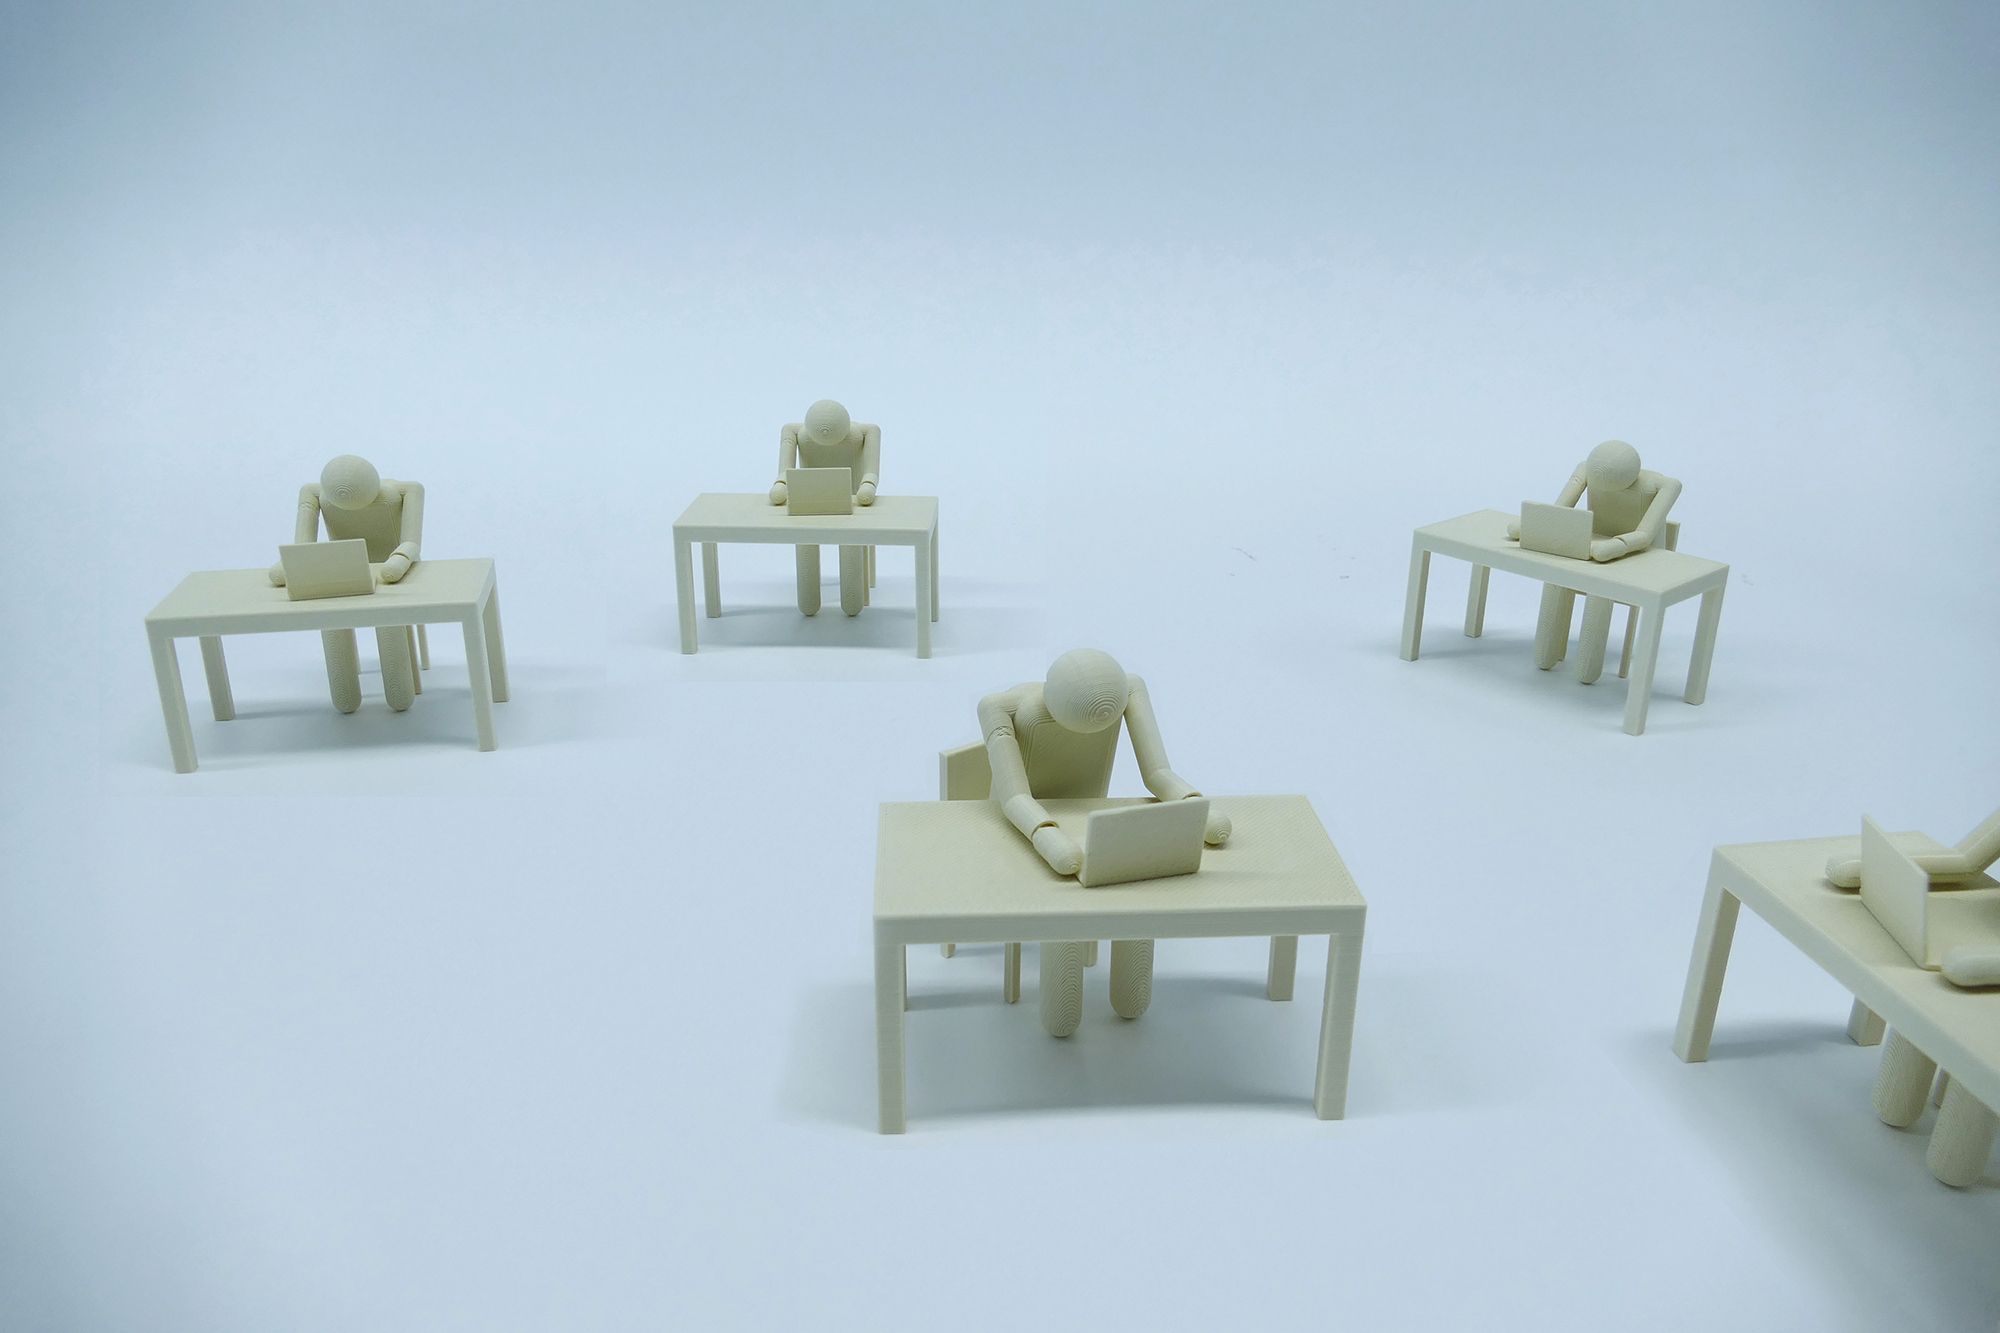 This image shows 3D-printed figures who work at a computer in an anonymous environment. They are anonymized, almost de-humanized.